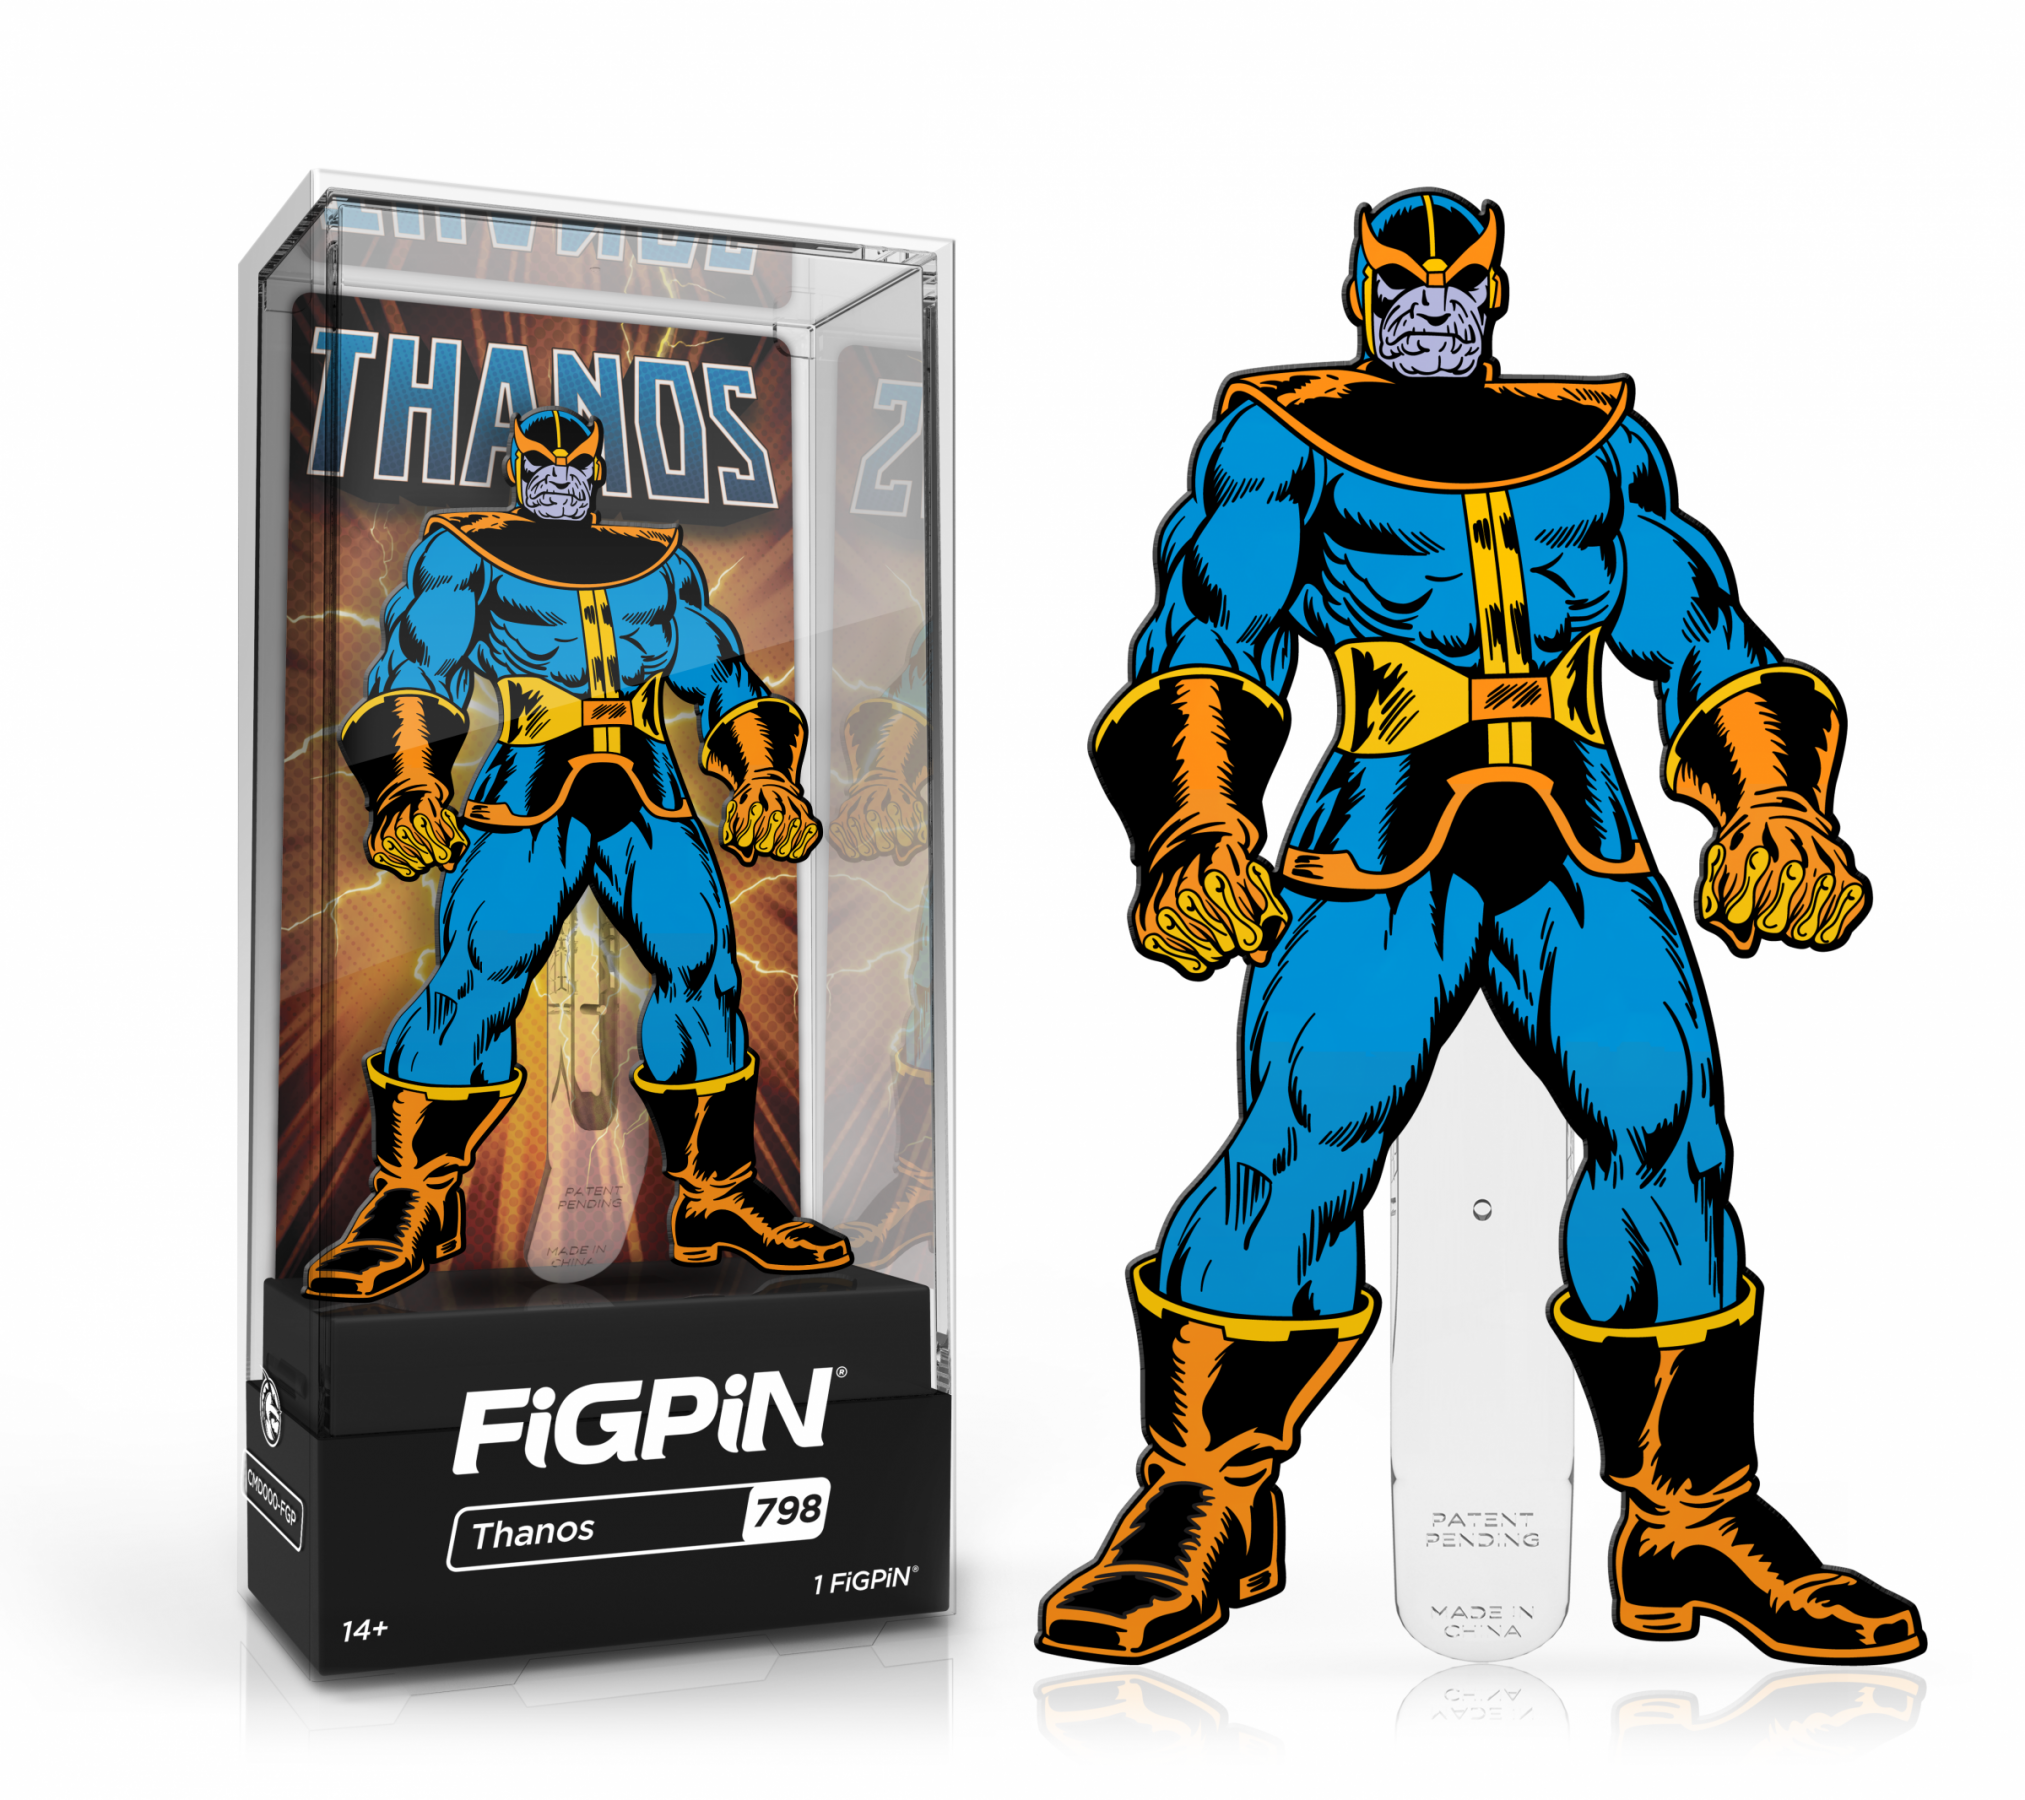 FiGPiN Thanos (798) Collectable Enamel Pin MKYNGYOTN7 |28281|